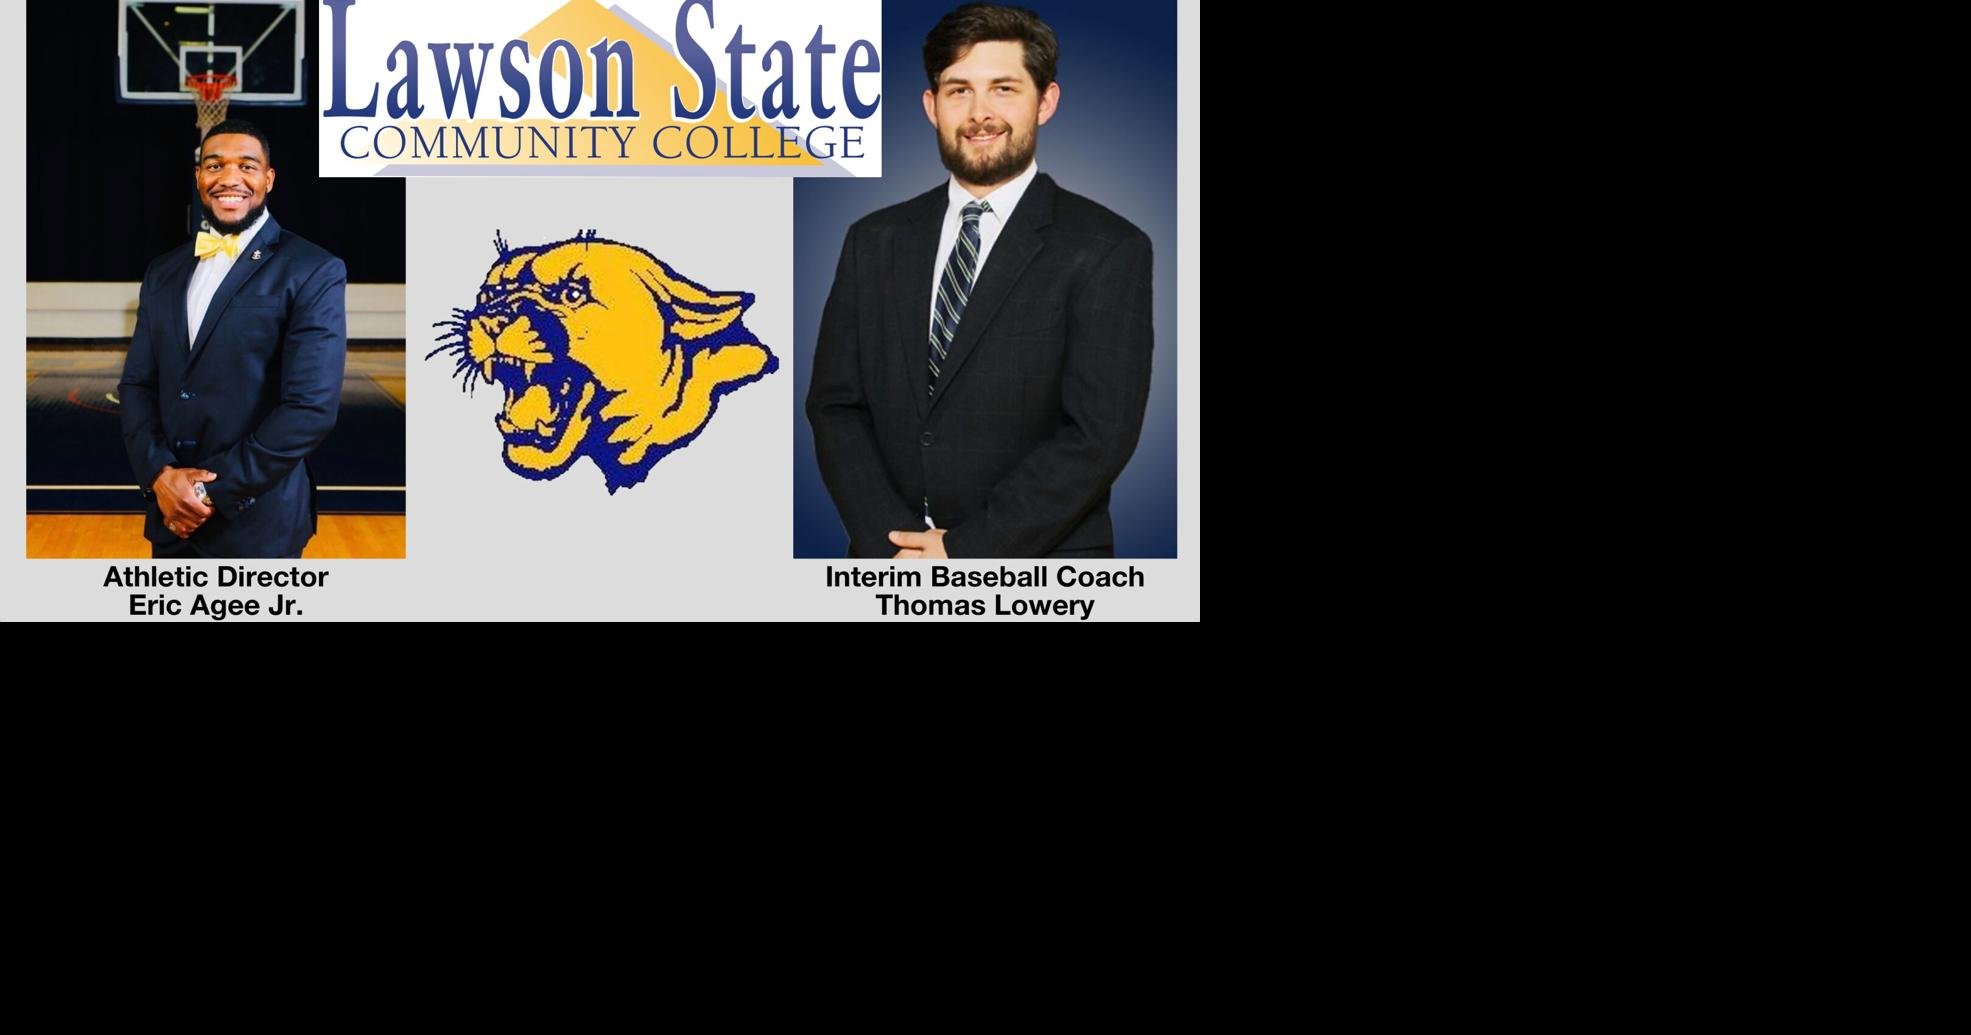 Lawson State Announces New Athletic Director and Interim Baseball Coach